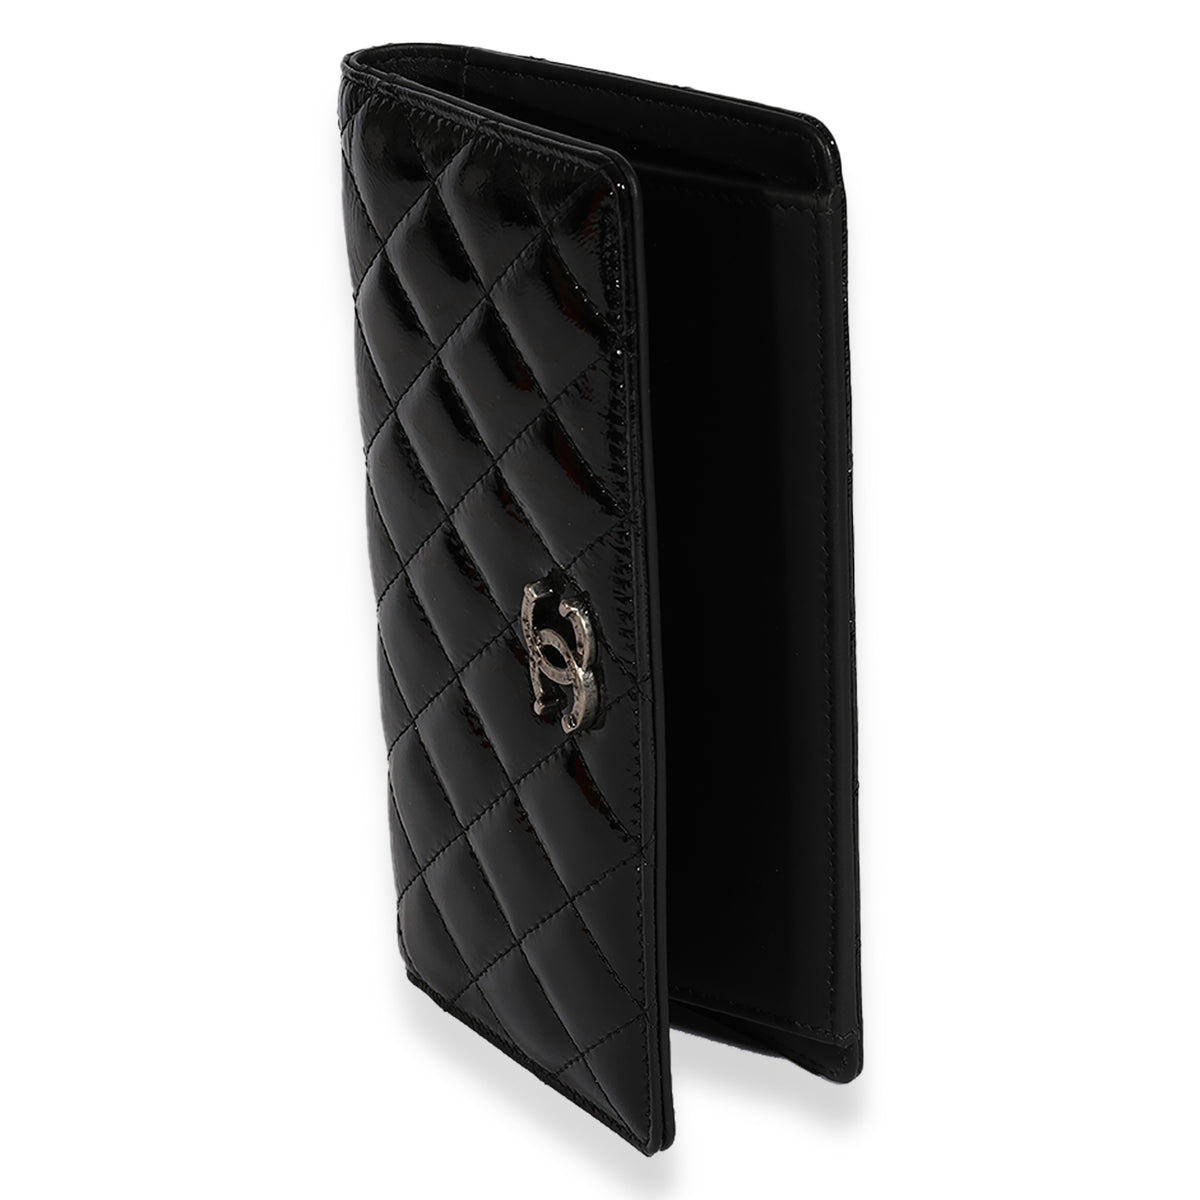 Chanel Black Quilted Patent Leather Yen Wallet, myGemma, IT